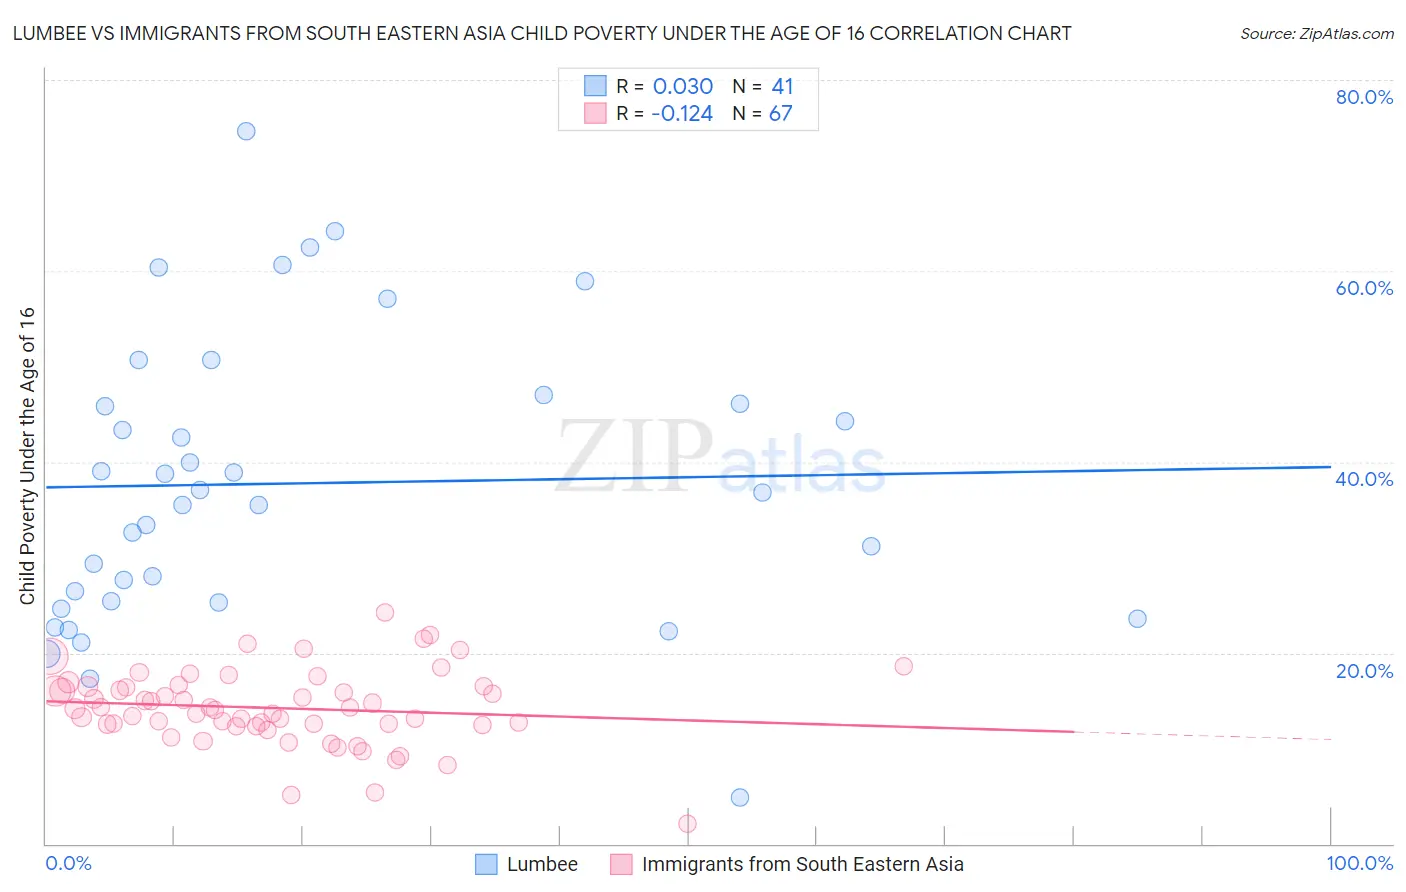 Lumbee vs Immigrants from South Eastern Asia Child Poverty Under the Age of 16